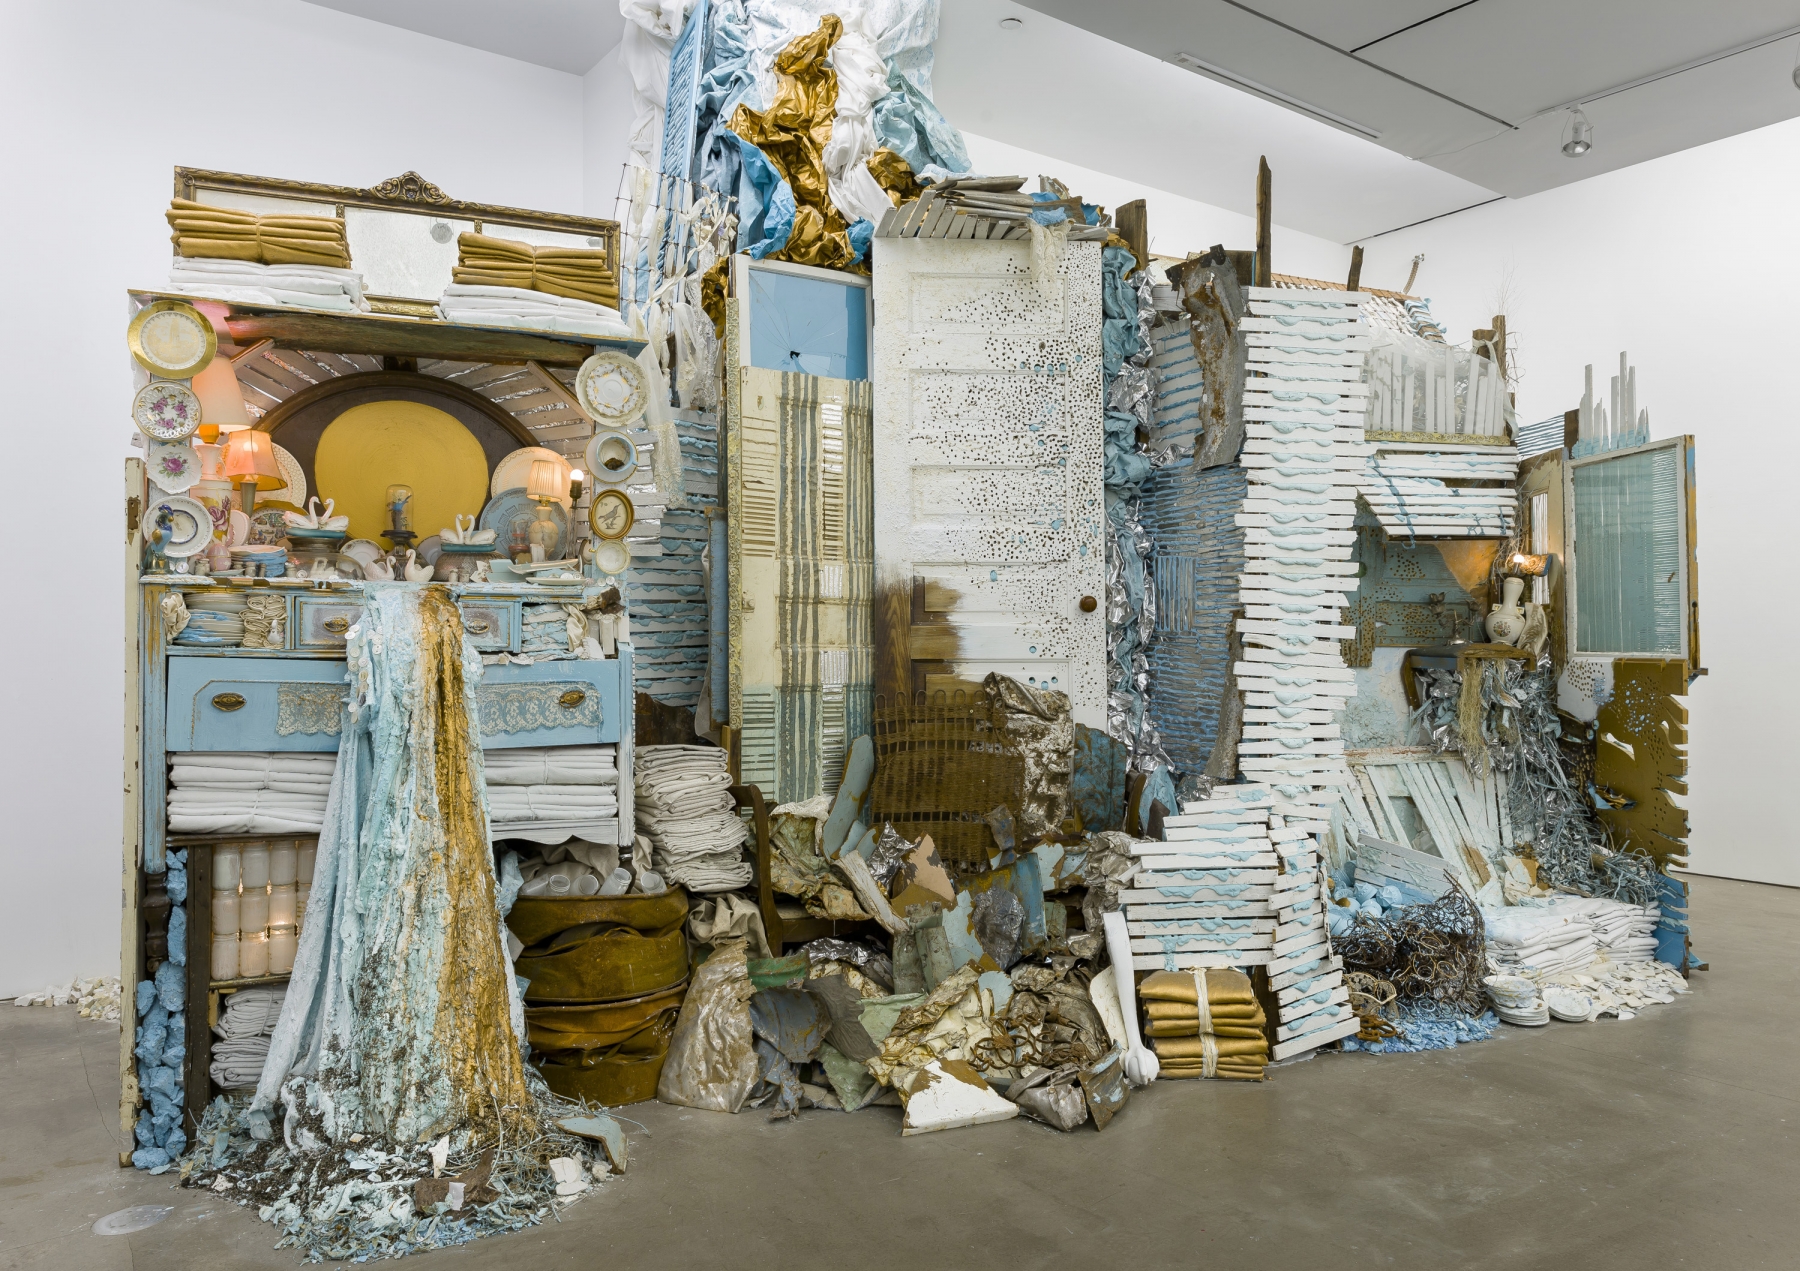 &quot;Swan Song&quot;, 2015, reclaimed lath, wood, marble, iron, paper, vintage furniture, dishware, figurines, natural debris, crushed reclaimed metal, light fixtures, vintage wedding dresses, bathtub, wallpaper, plaster, and paint.